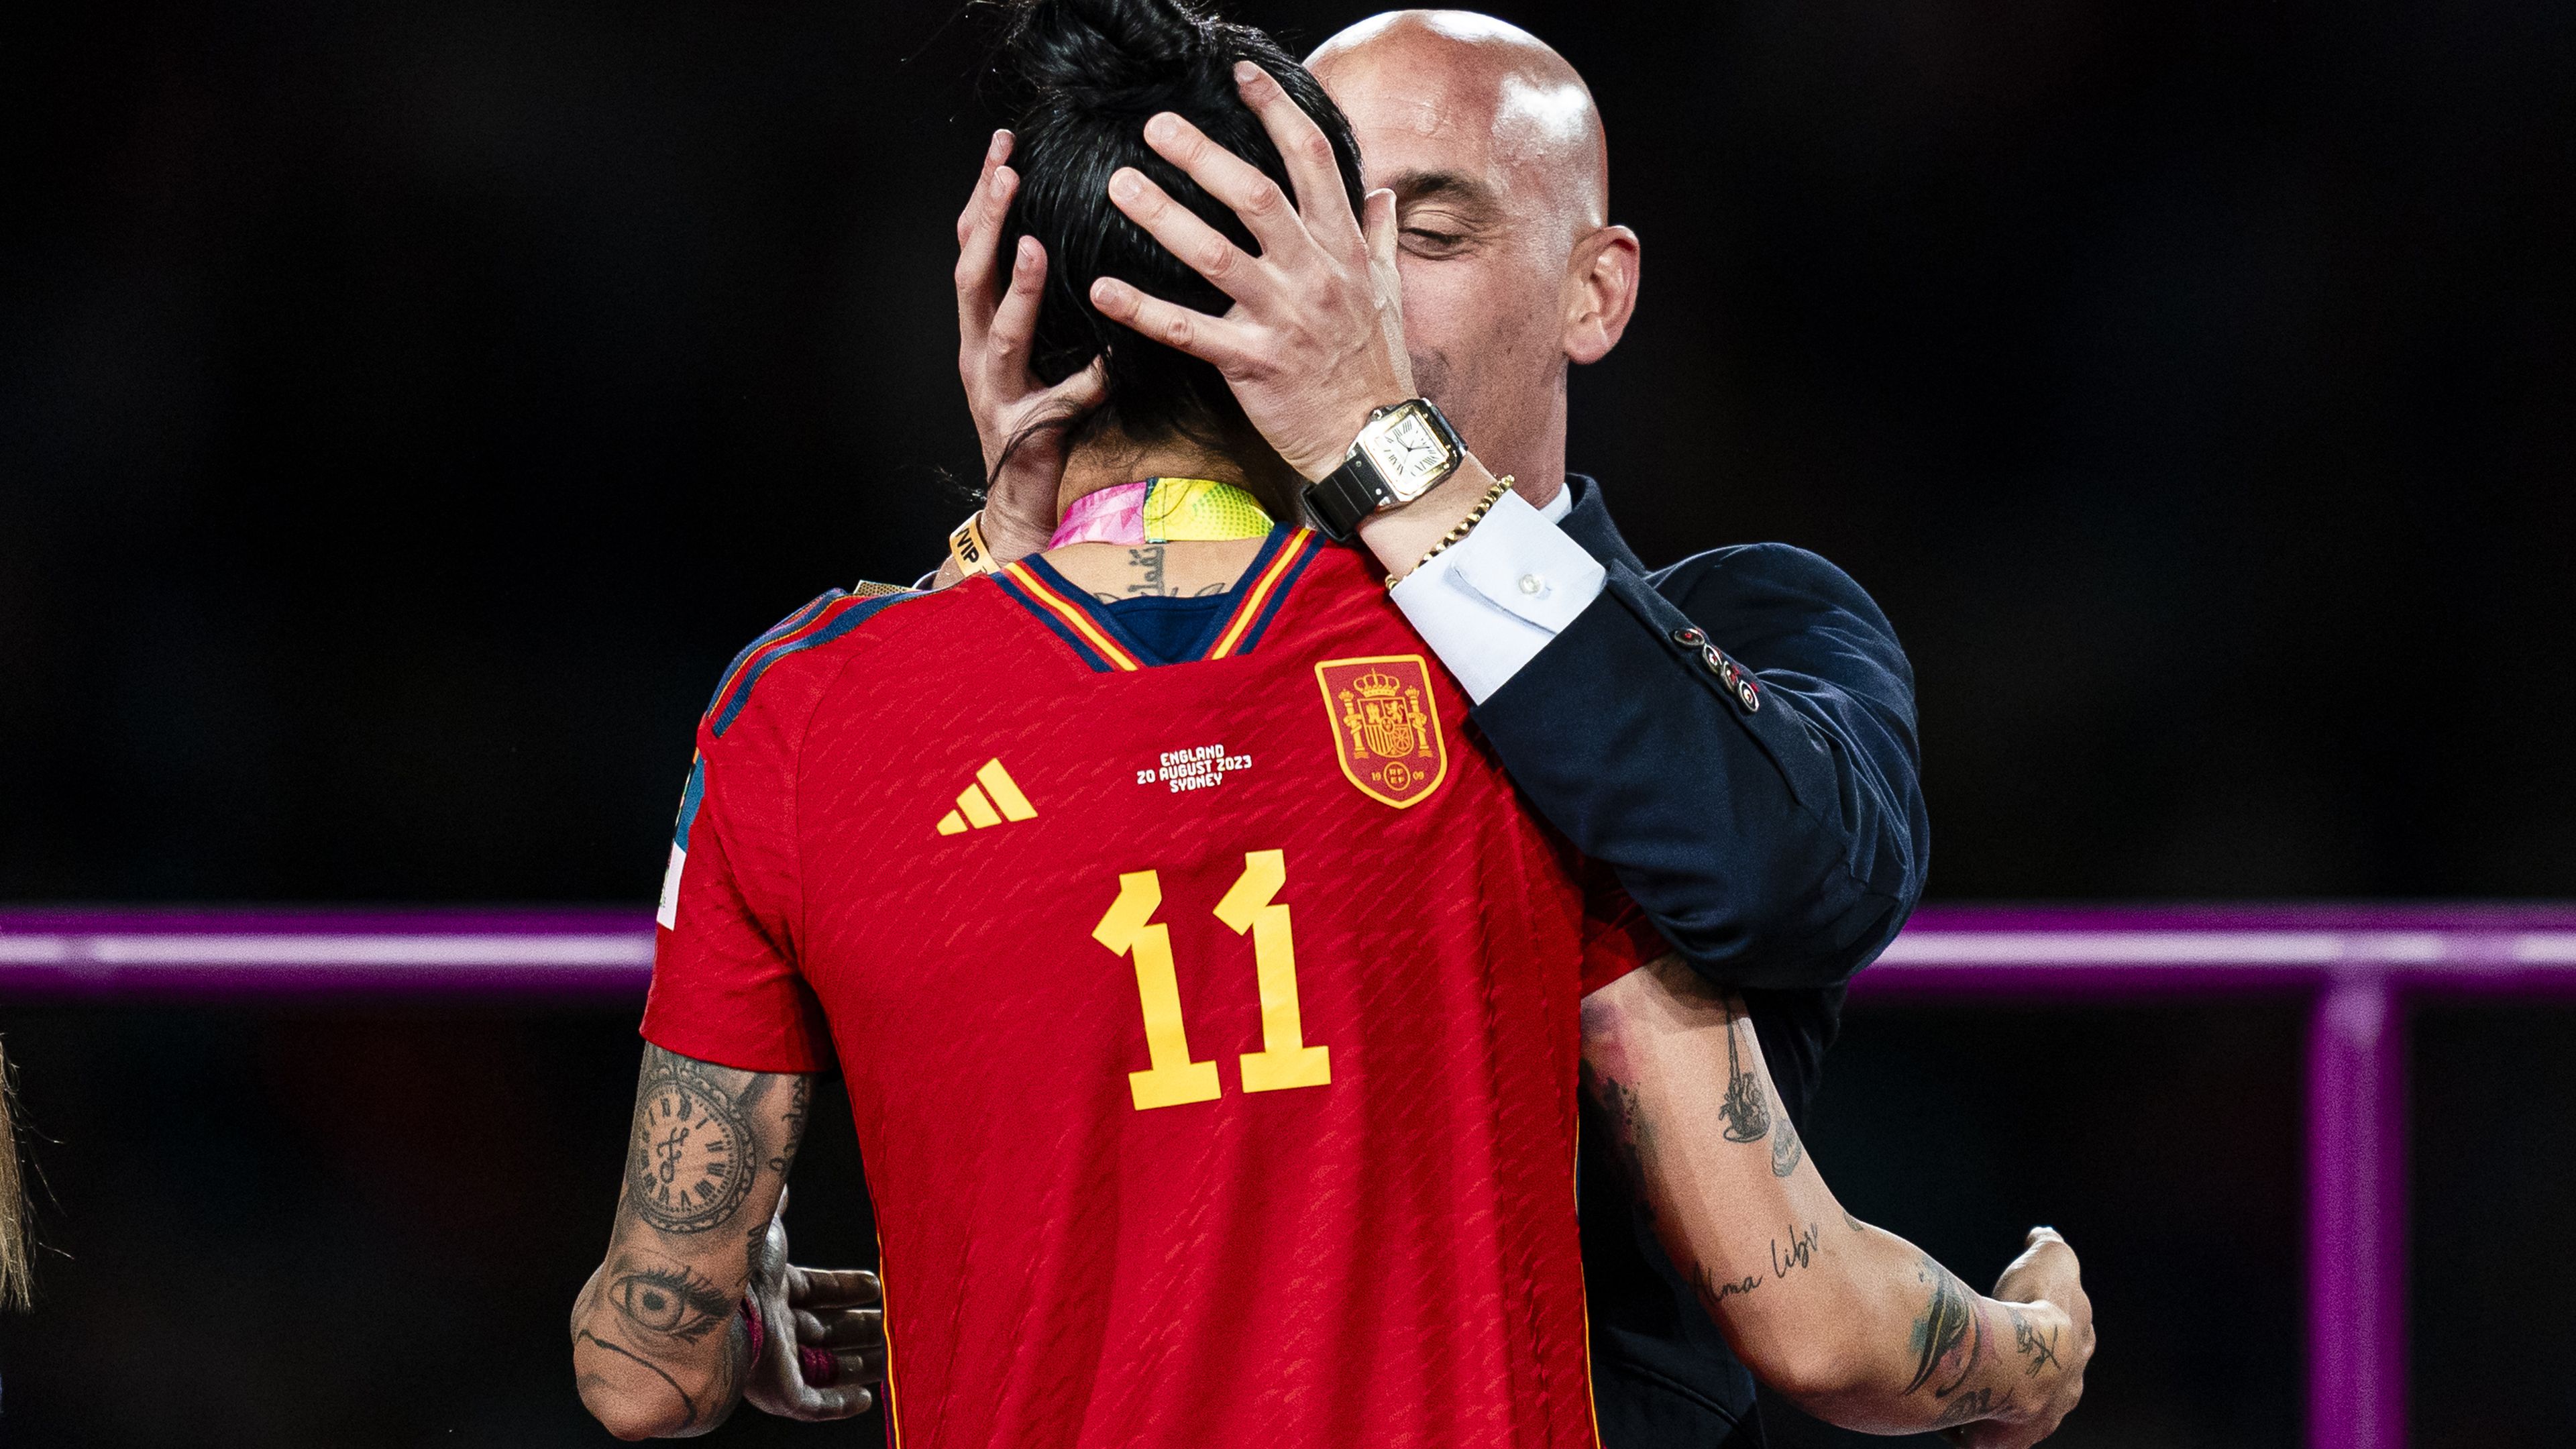 Spanish government issues 'strong message' after explosive World Cup kiss furore